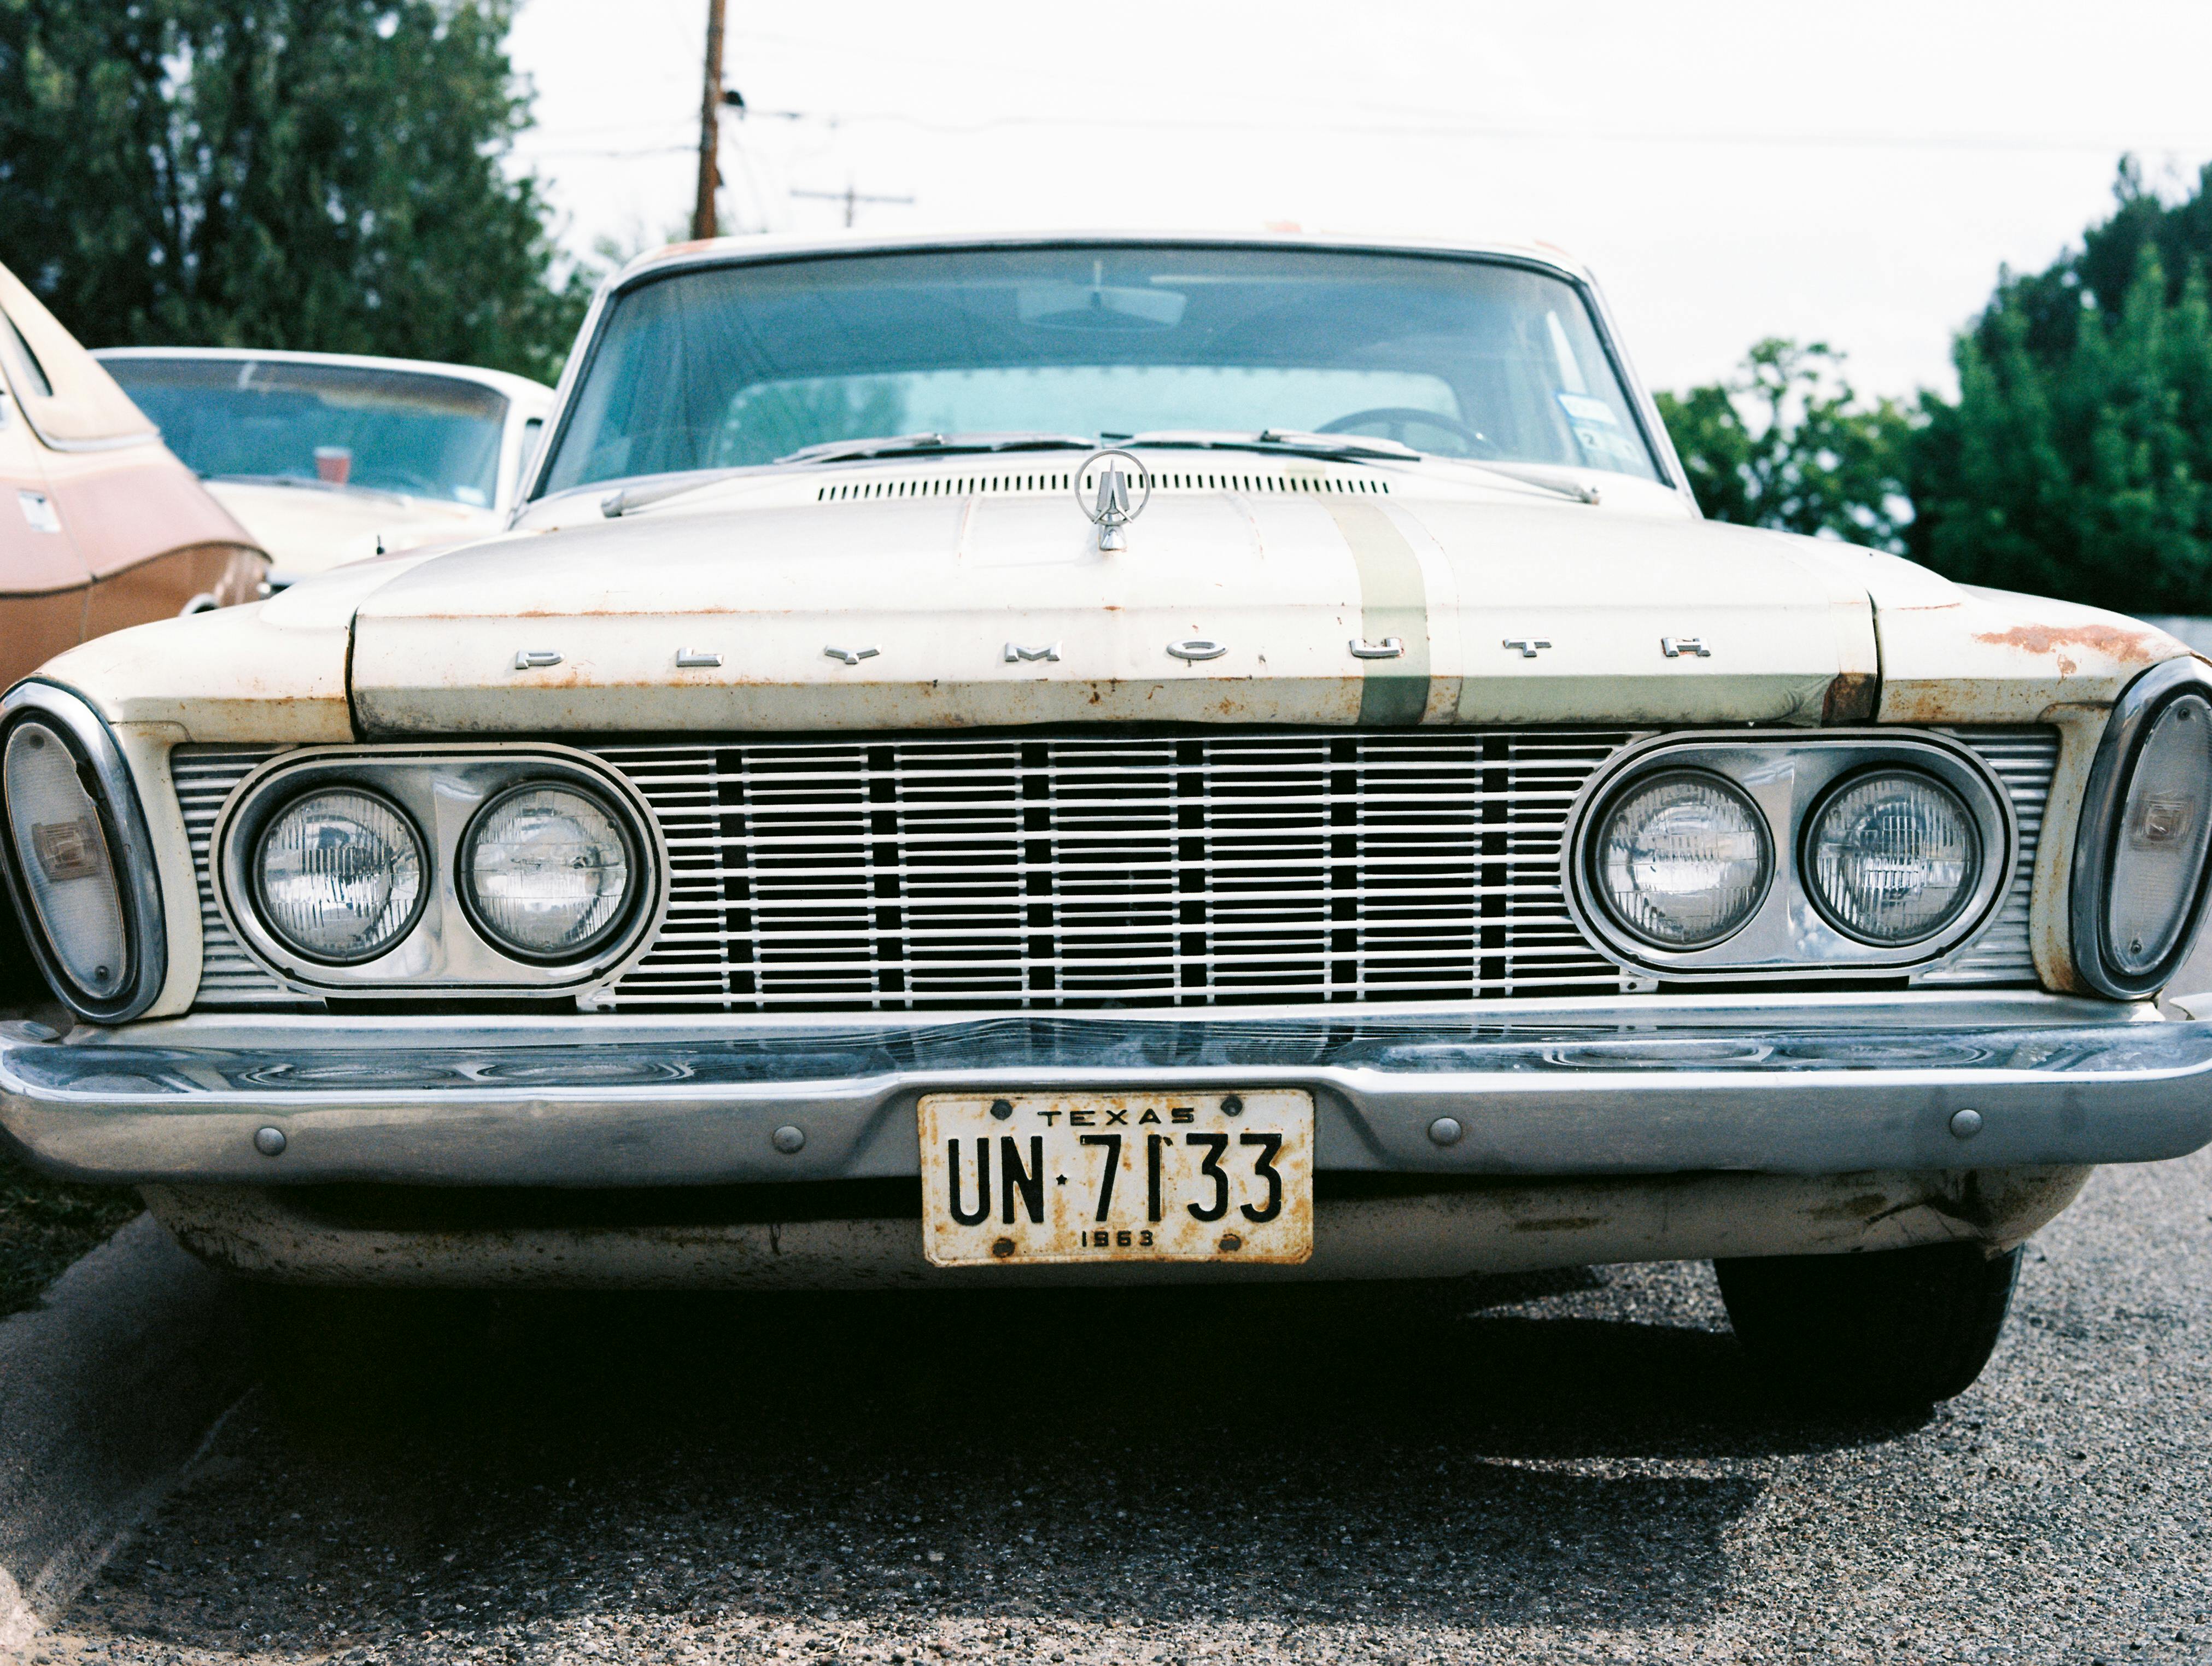 Old Rusty White Car on the Street · Free Stock Photo